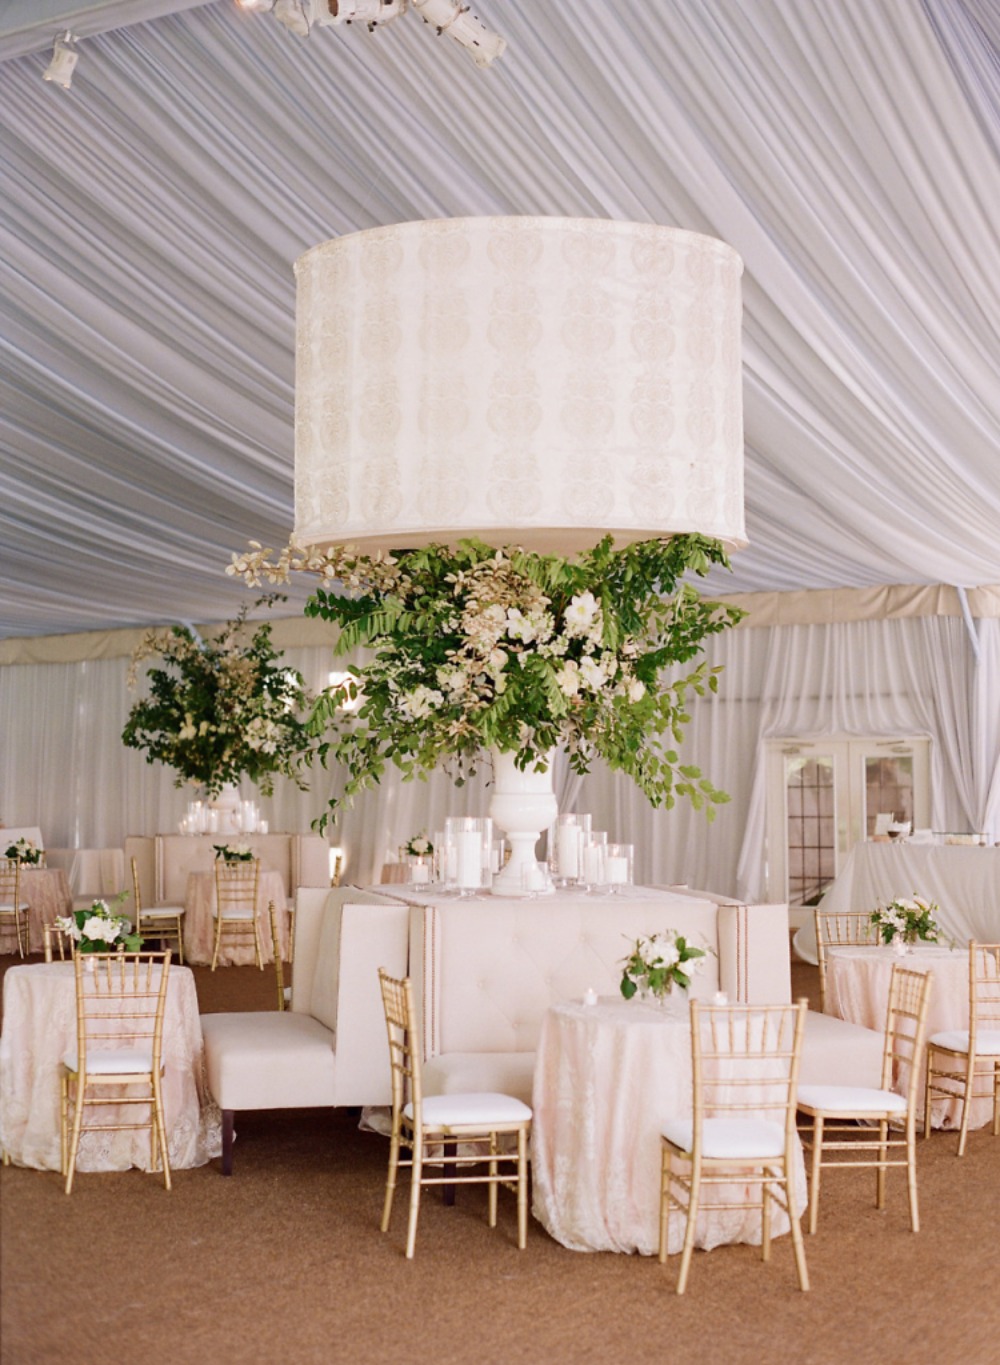 impressive southern style wedding seating and floral decor